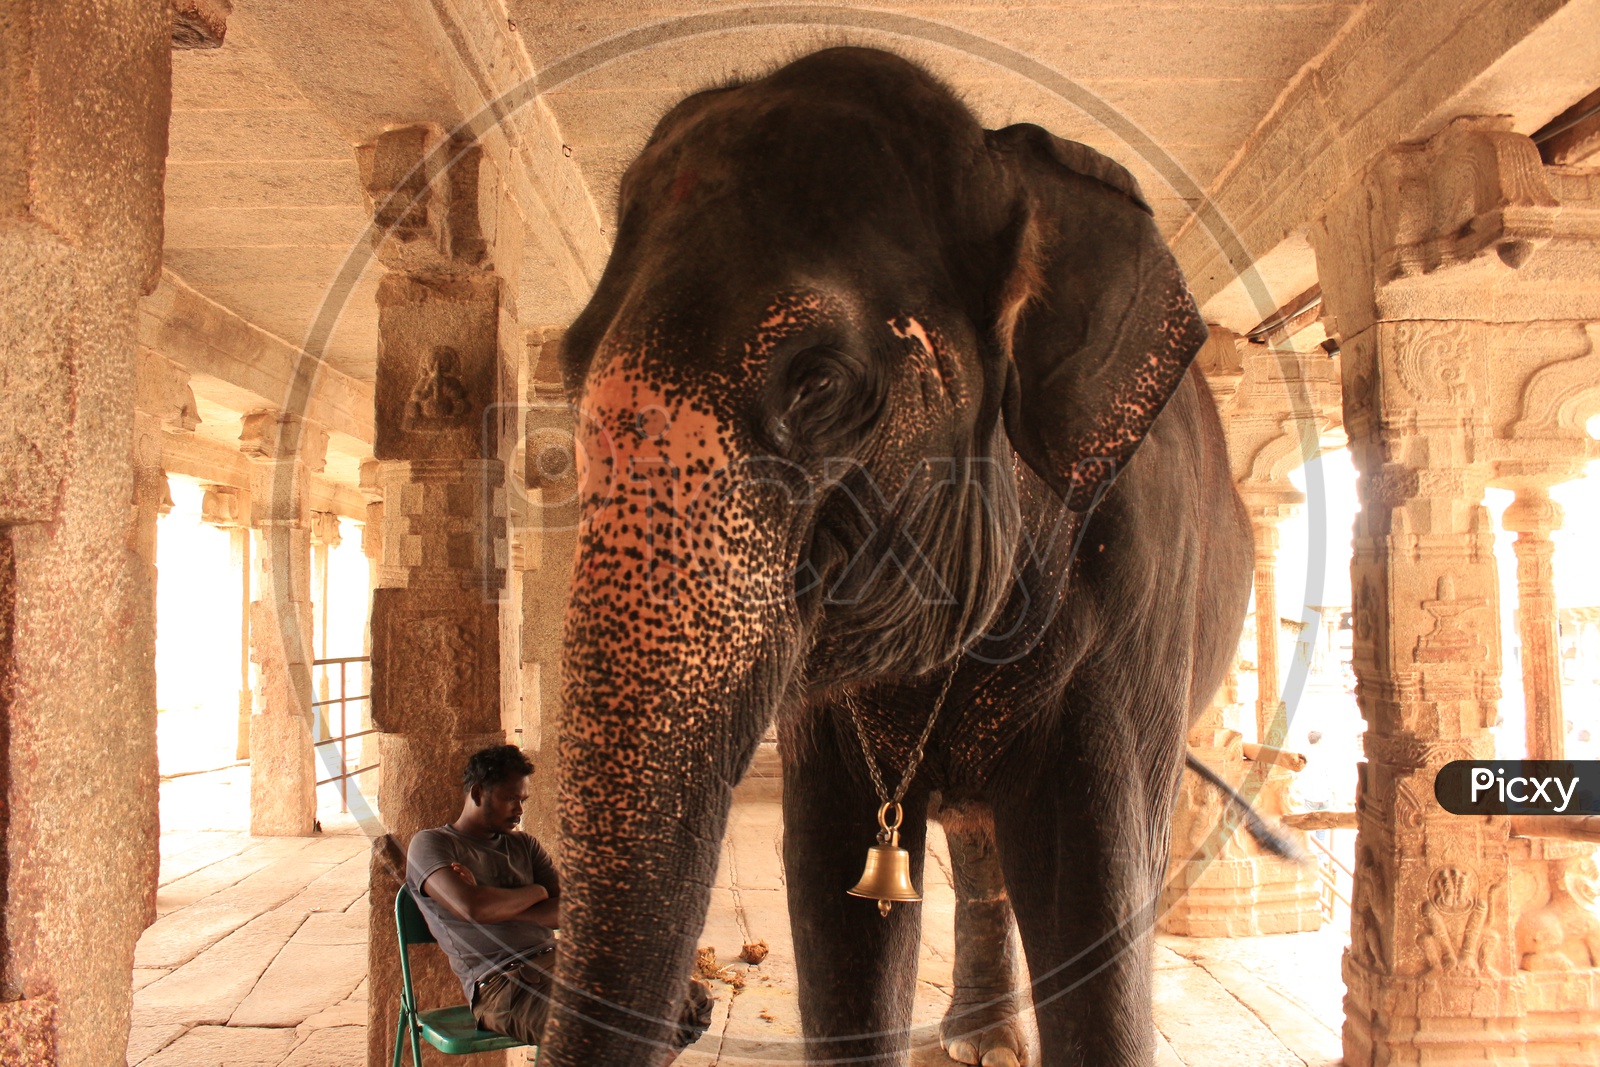 Indian Temple elephant In a Temple in Hampi